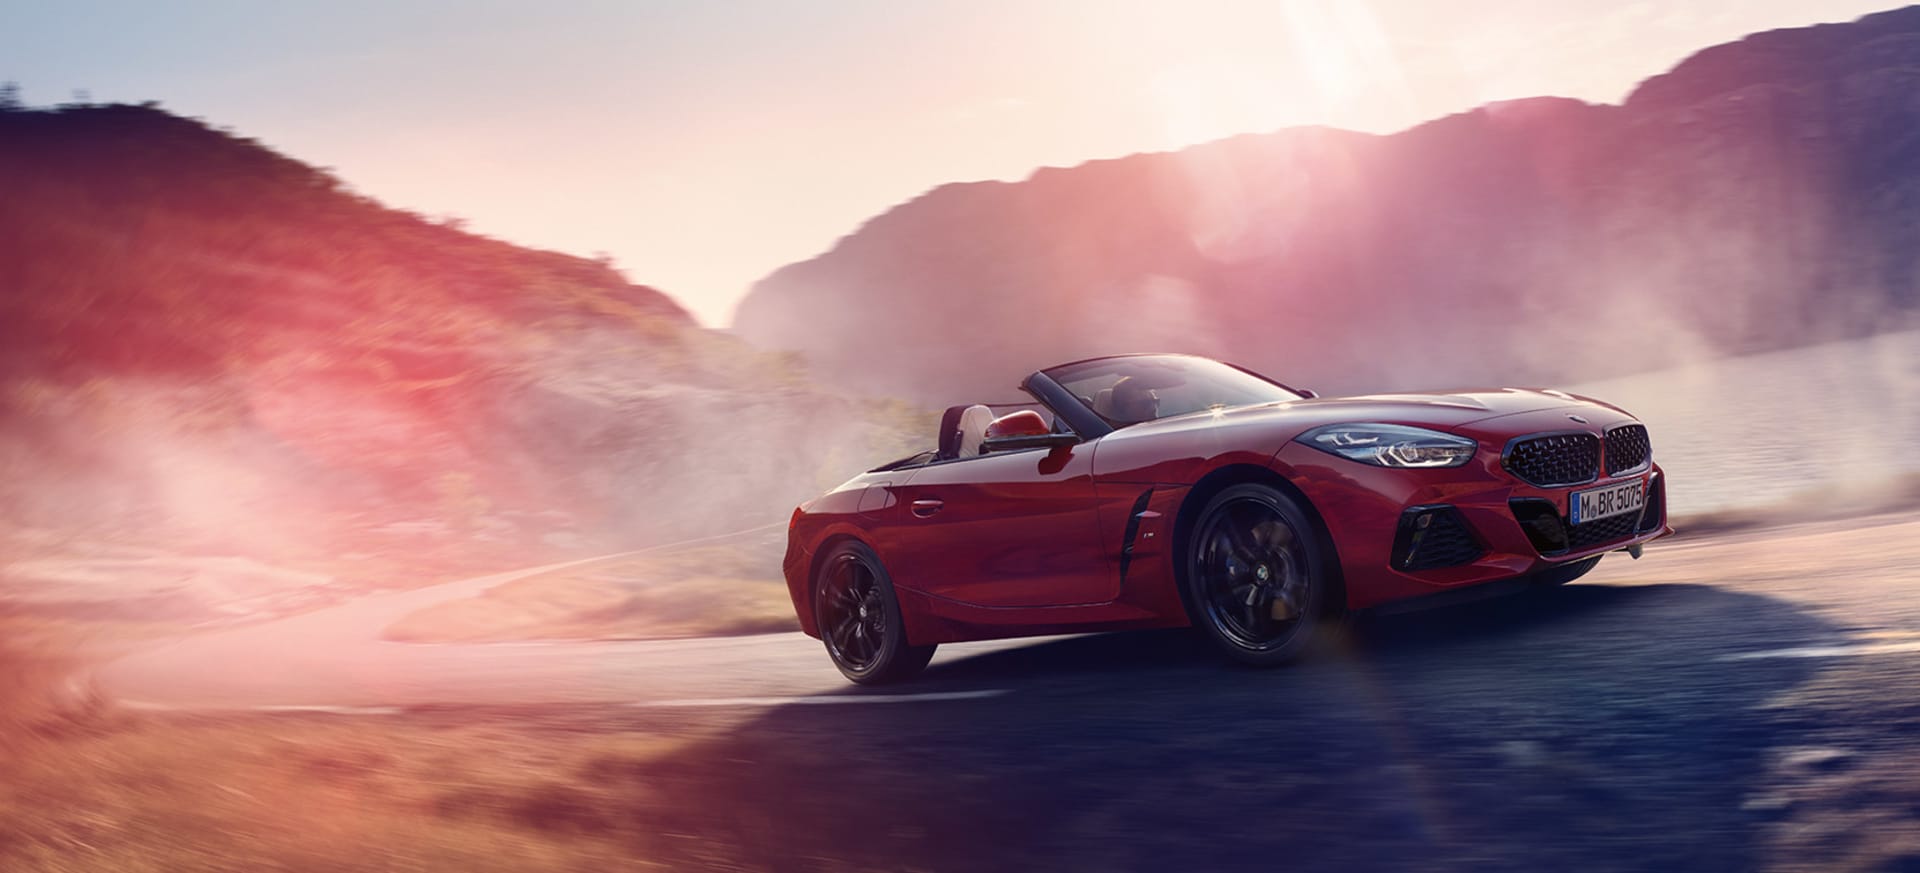 CHECK OUT DETAIL FEATURES OF THE BMW Z4.